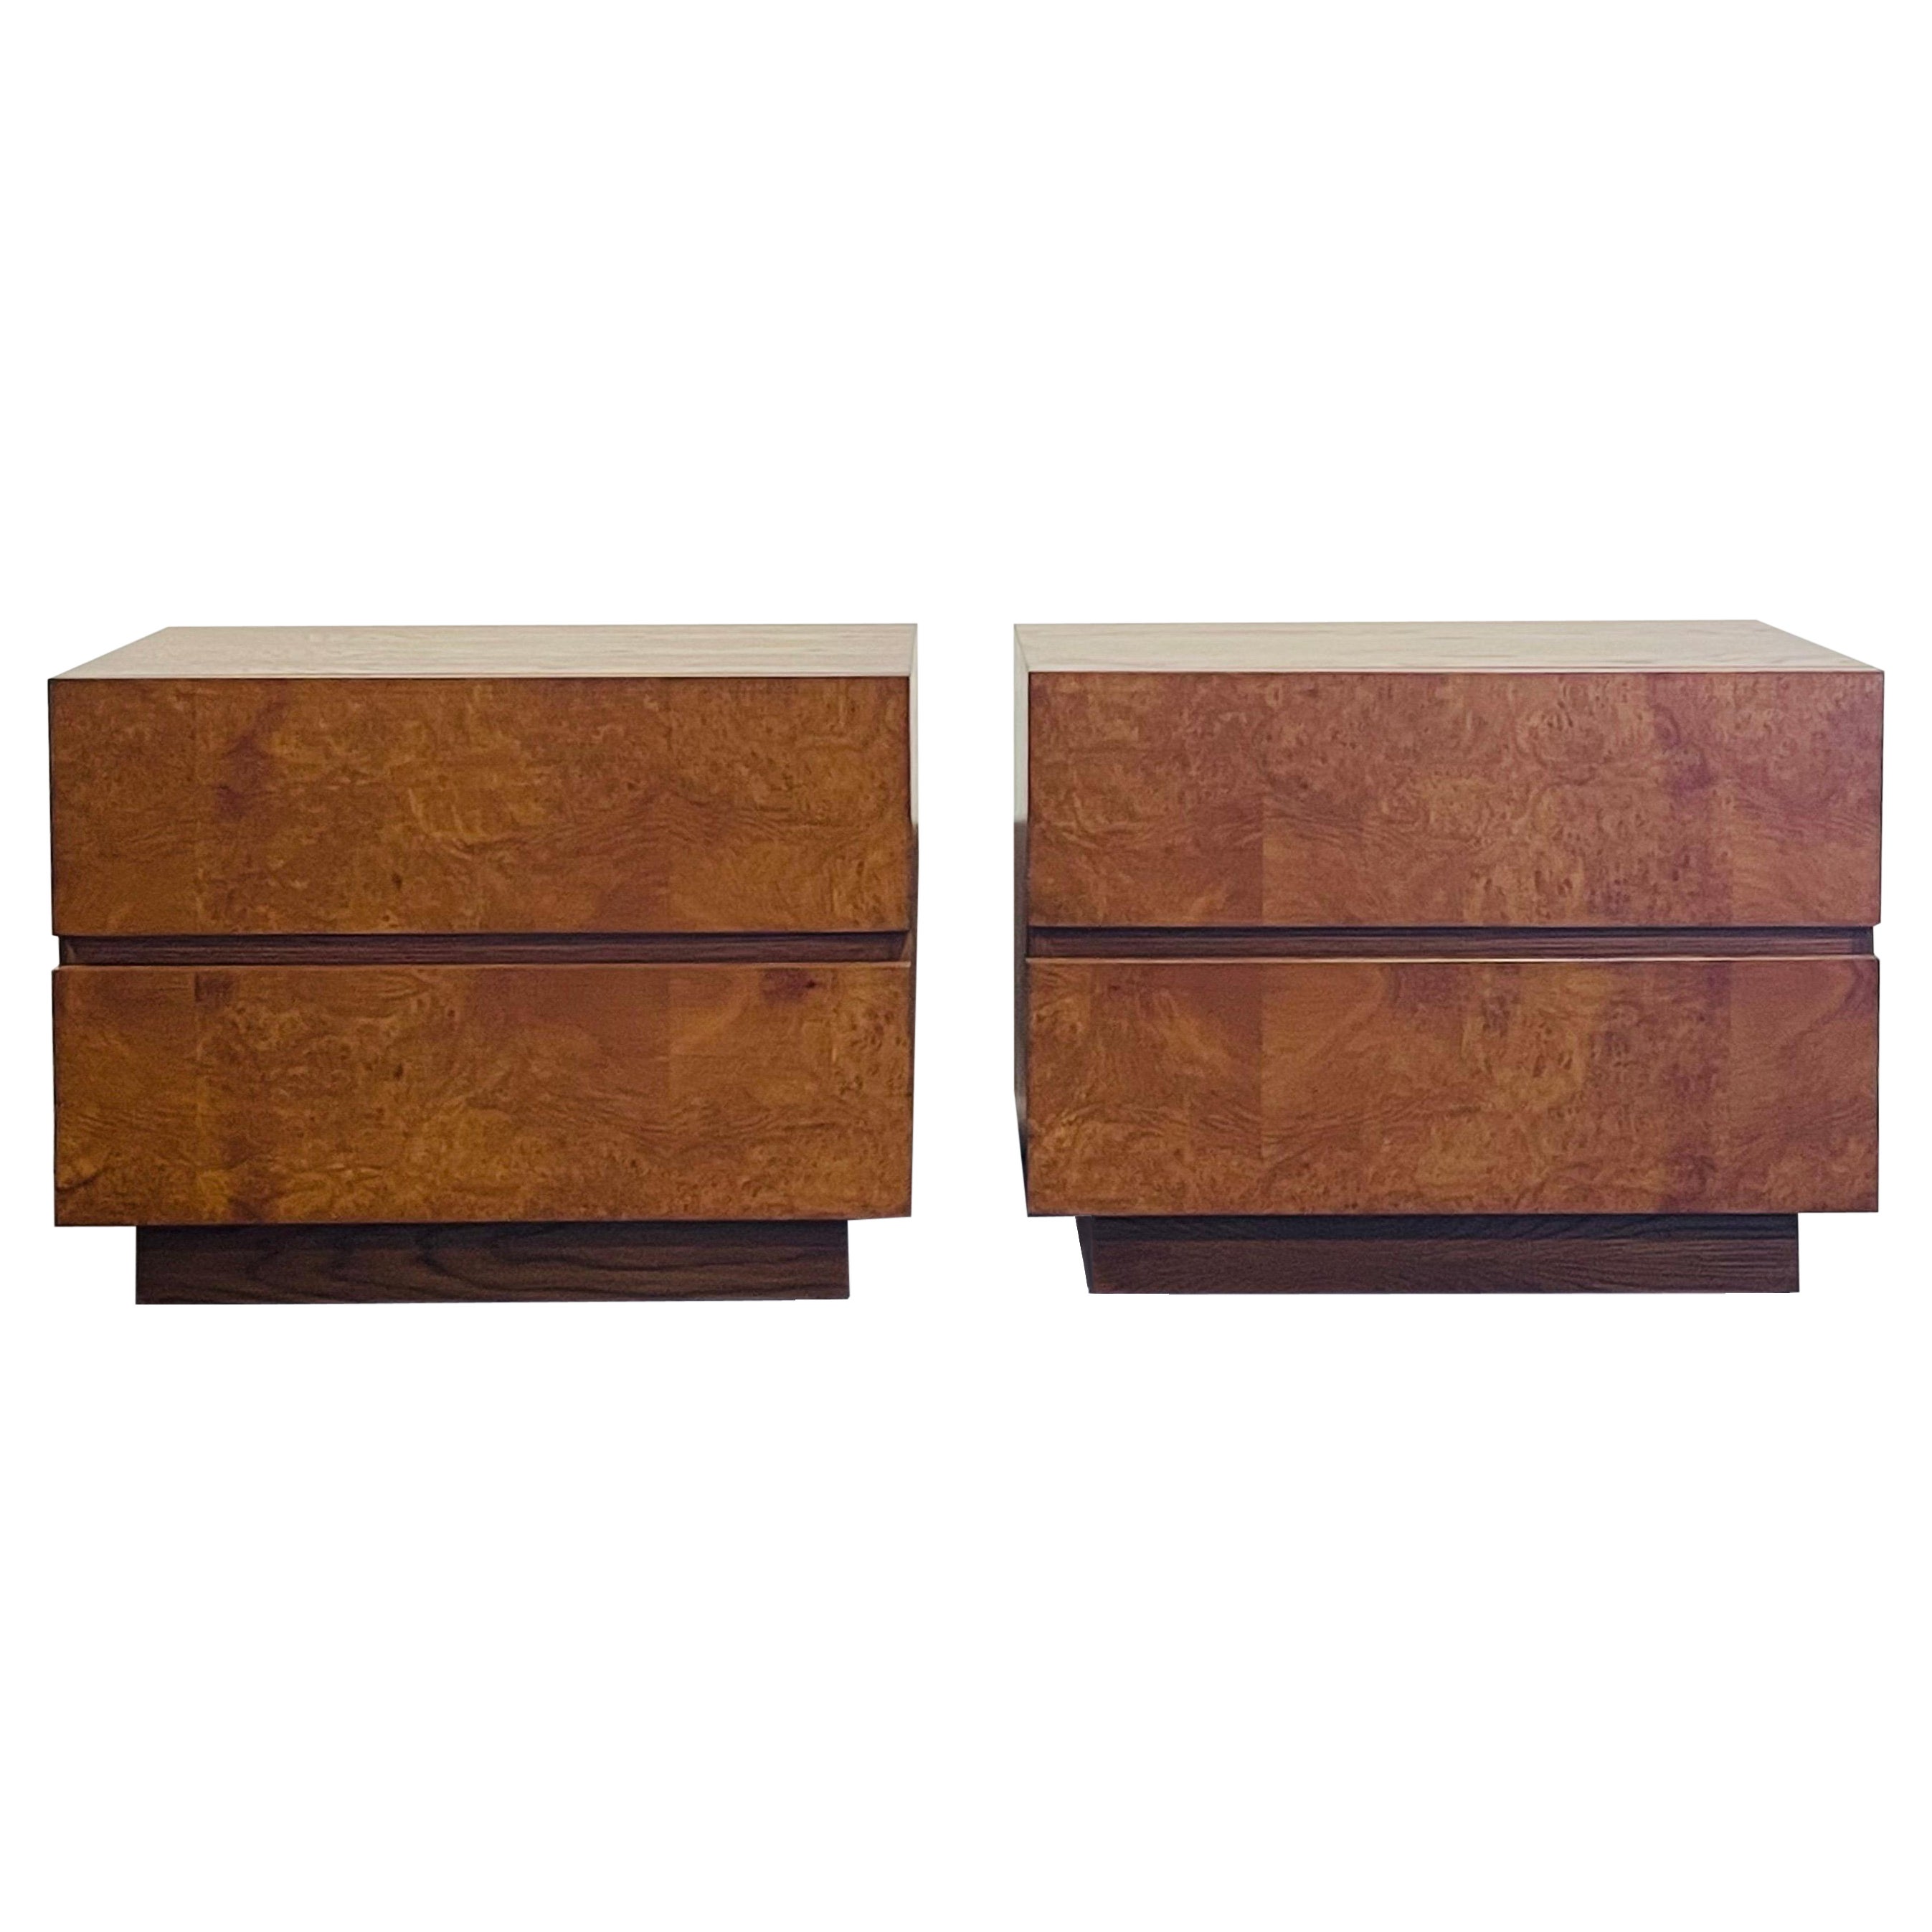 Pair of Minimalist 'Amboine' Burlwood Night Stands by Design Frères